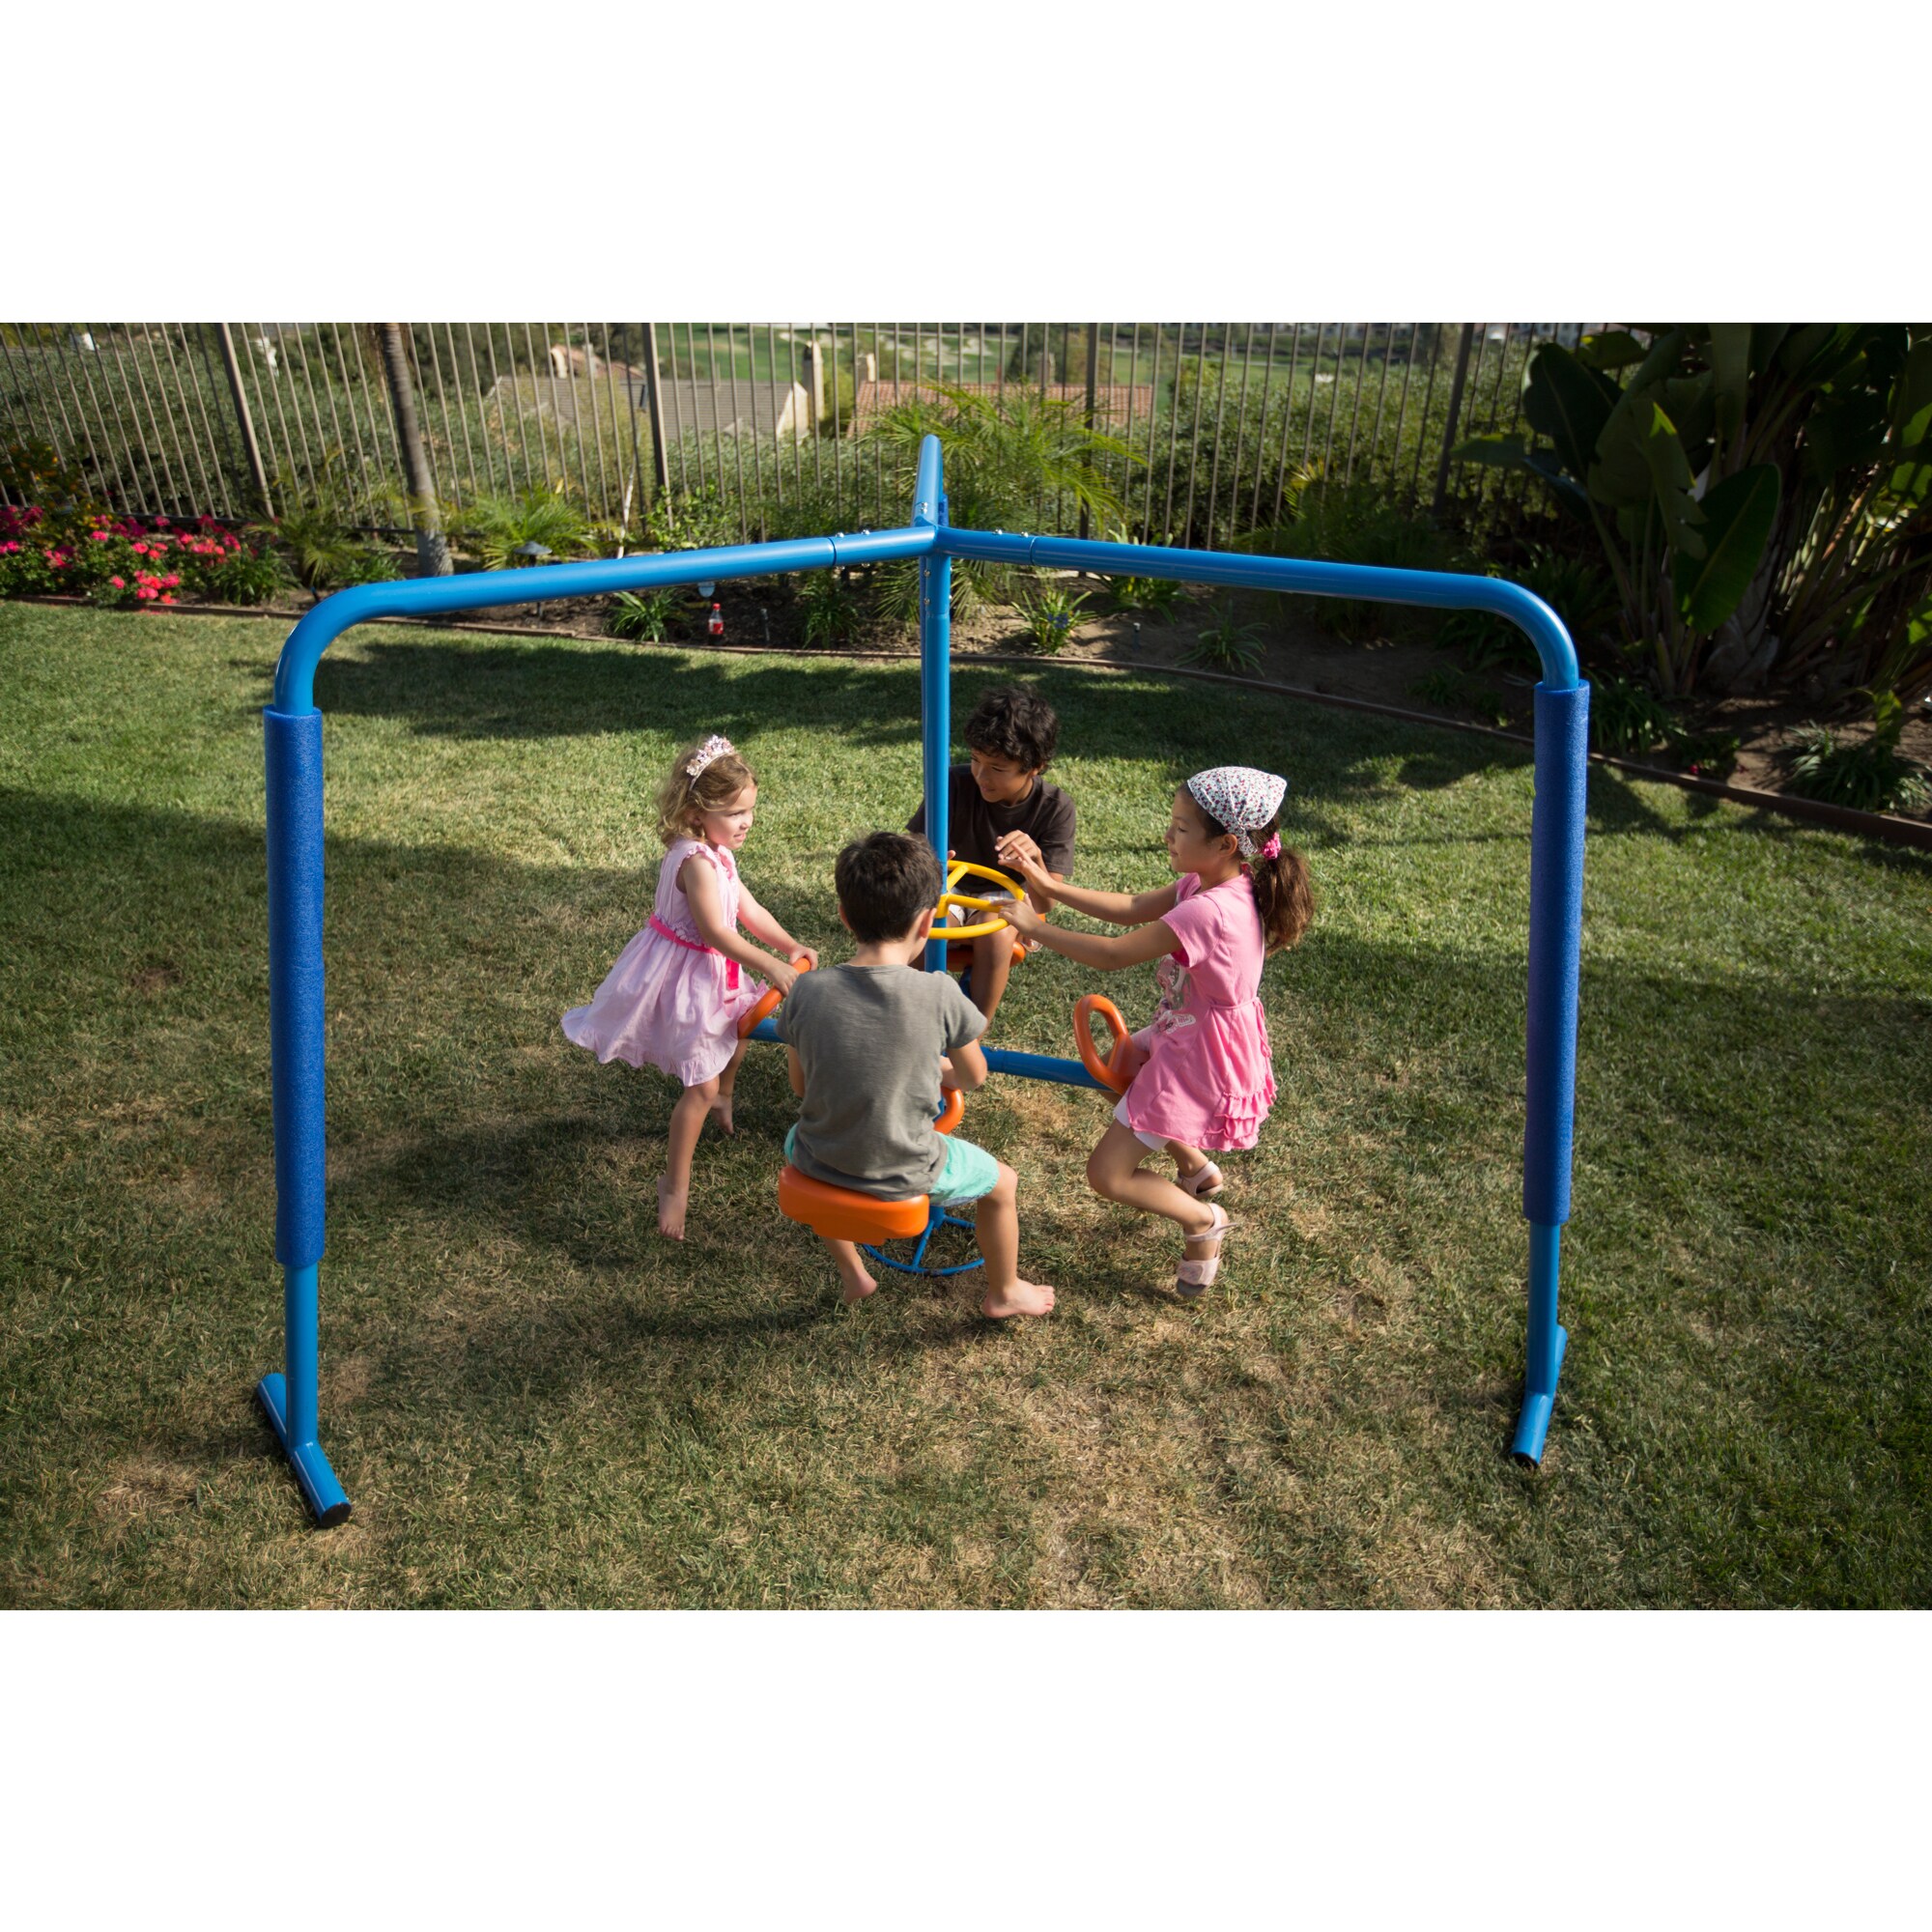 Outdoor Play Find Great Toys Hobbies Deals Shopping At Overstockcom